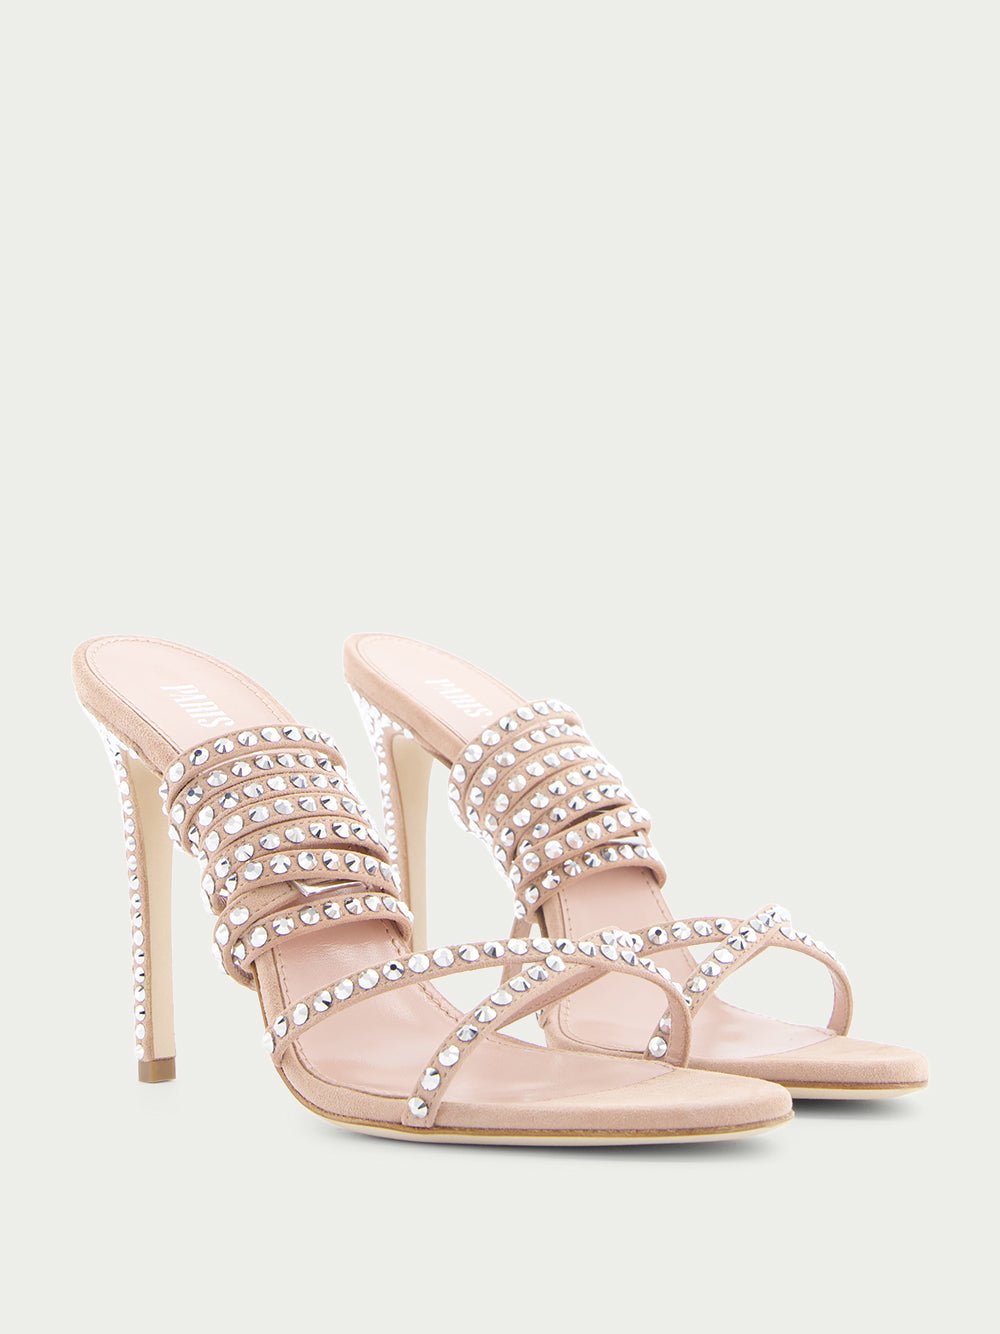 Paris TexasHolly Zoe 105mm Leather Sandals at Fashion Clinic